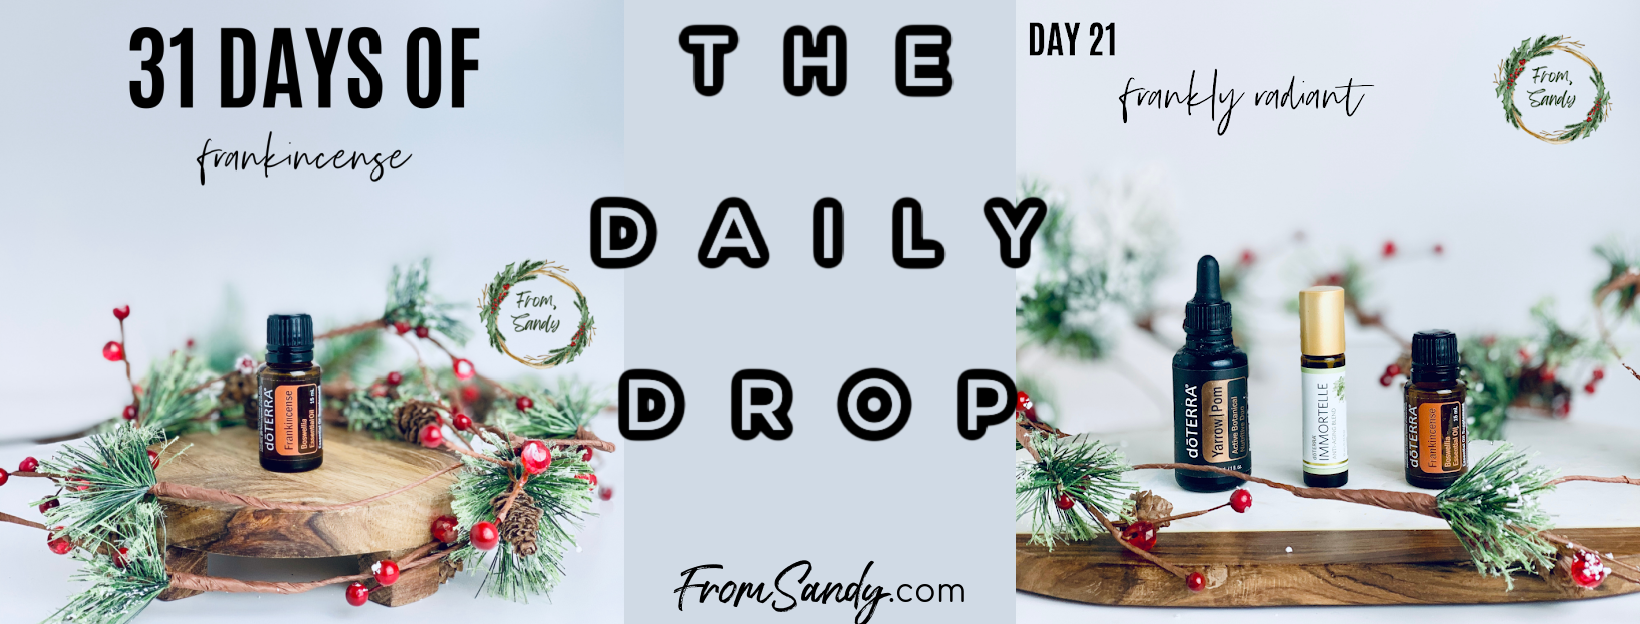 Frankly Radiant (31 Days of Frankincense: Day 21), From Sandy